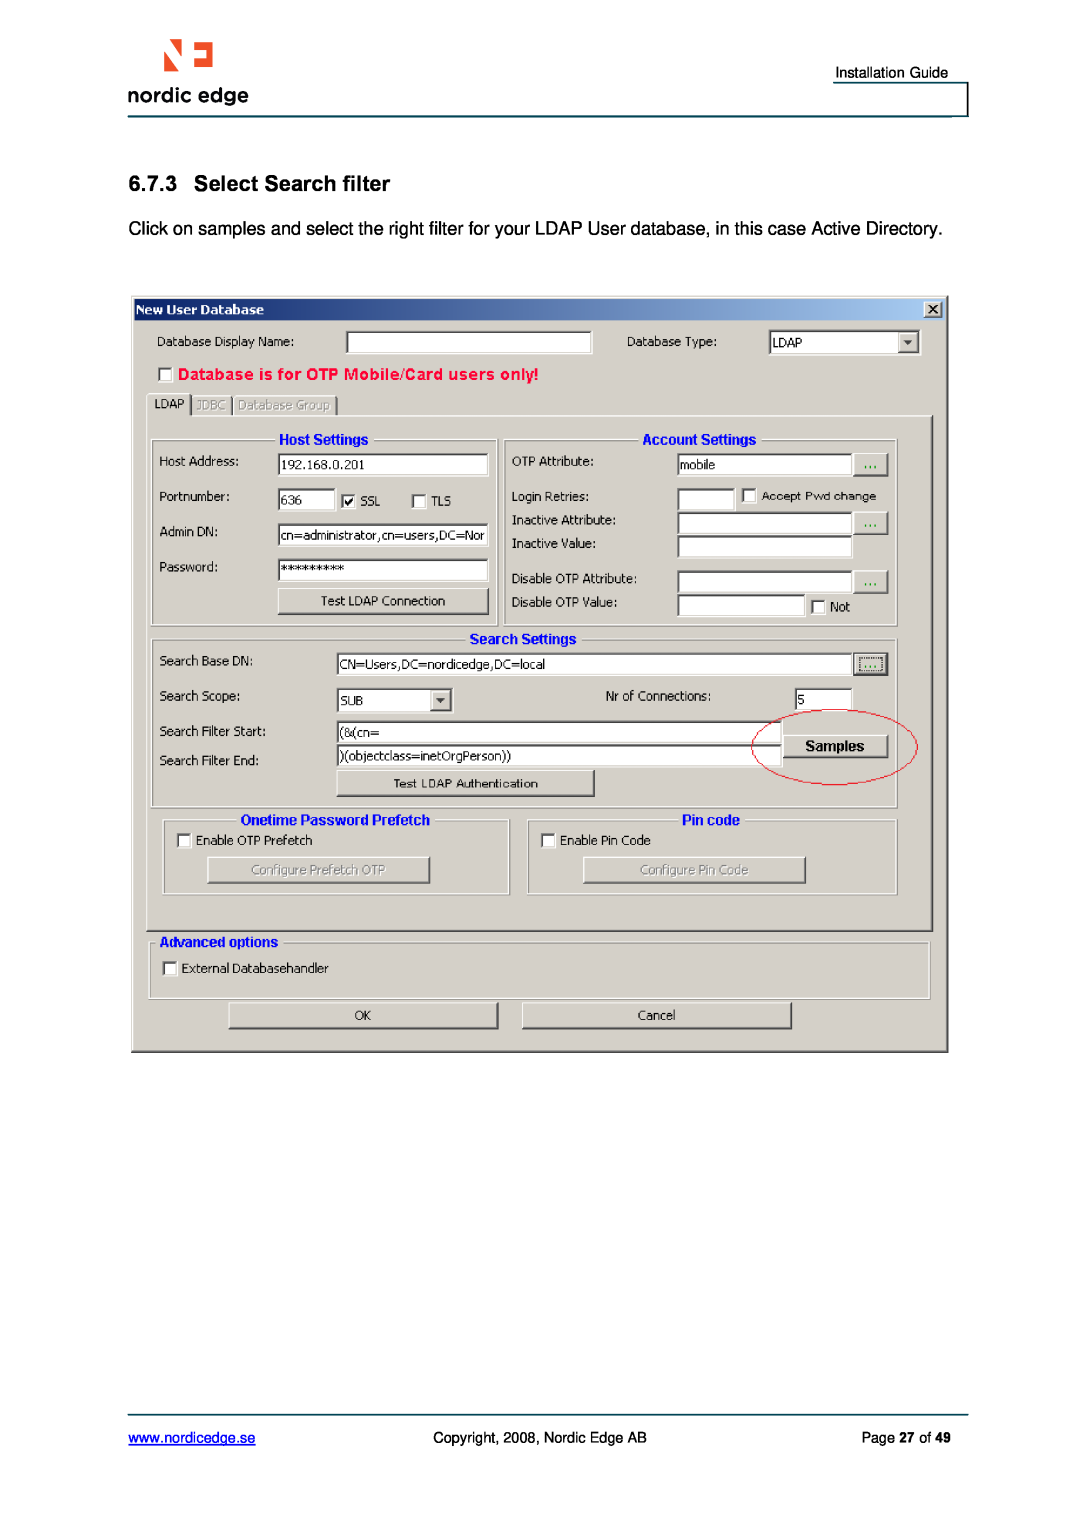 Cisco Systems ASA 5500 manual Select Search filter, Installation Guide, Copyright, 2008, Nordic Edge AB, Page 27 of 